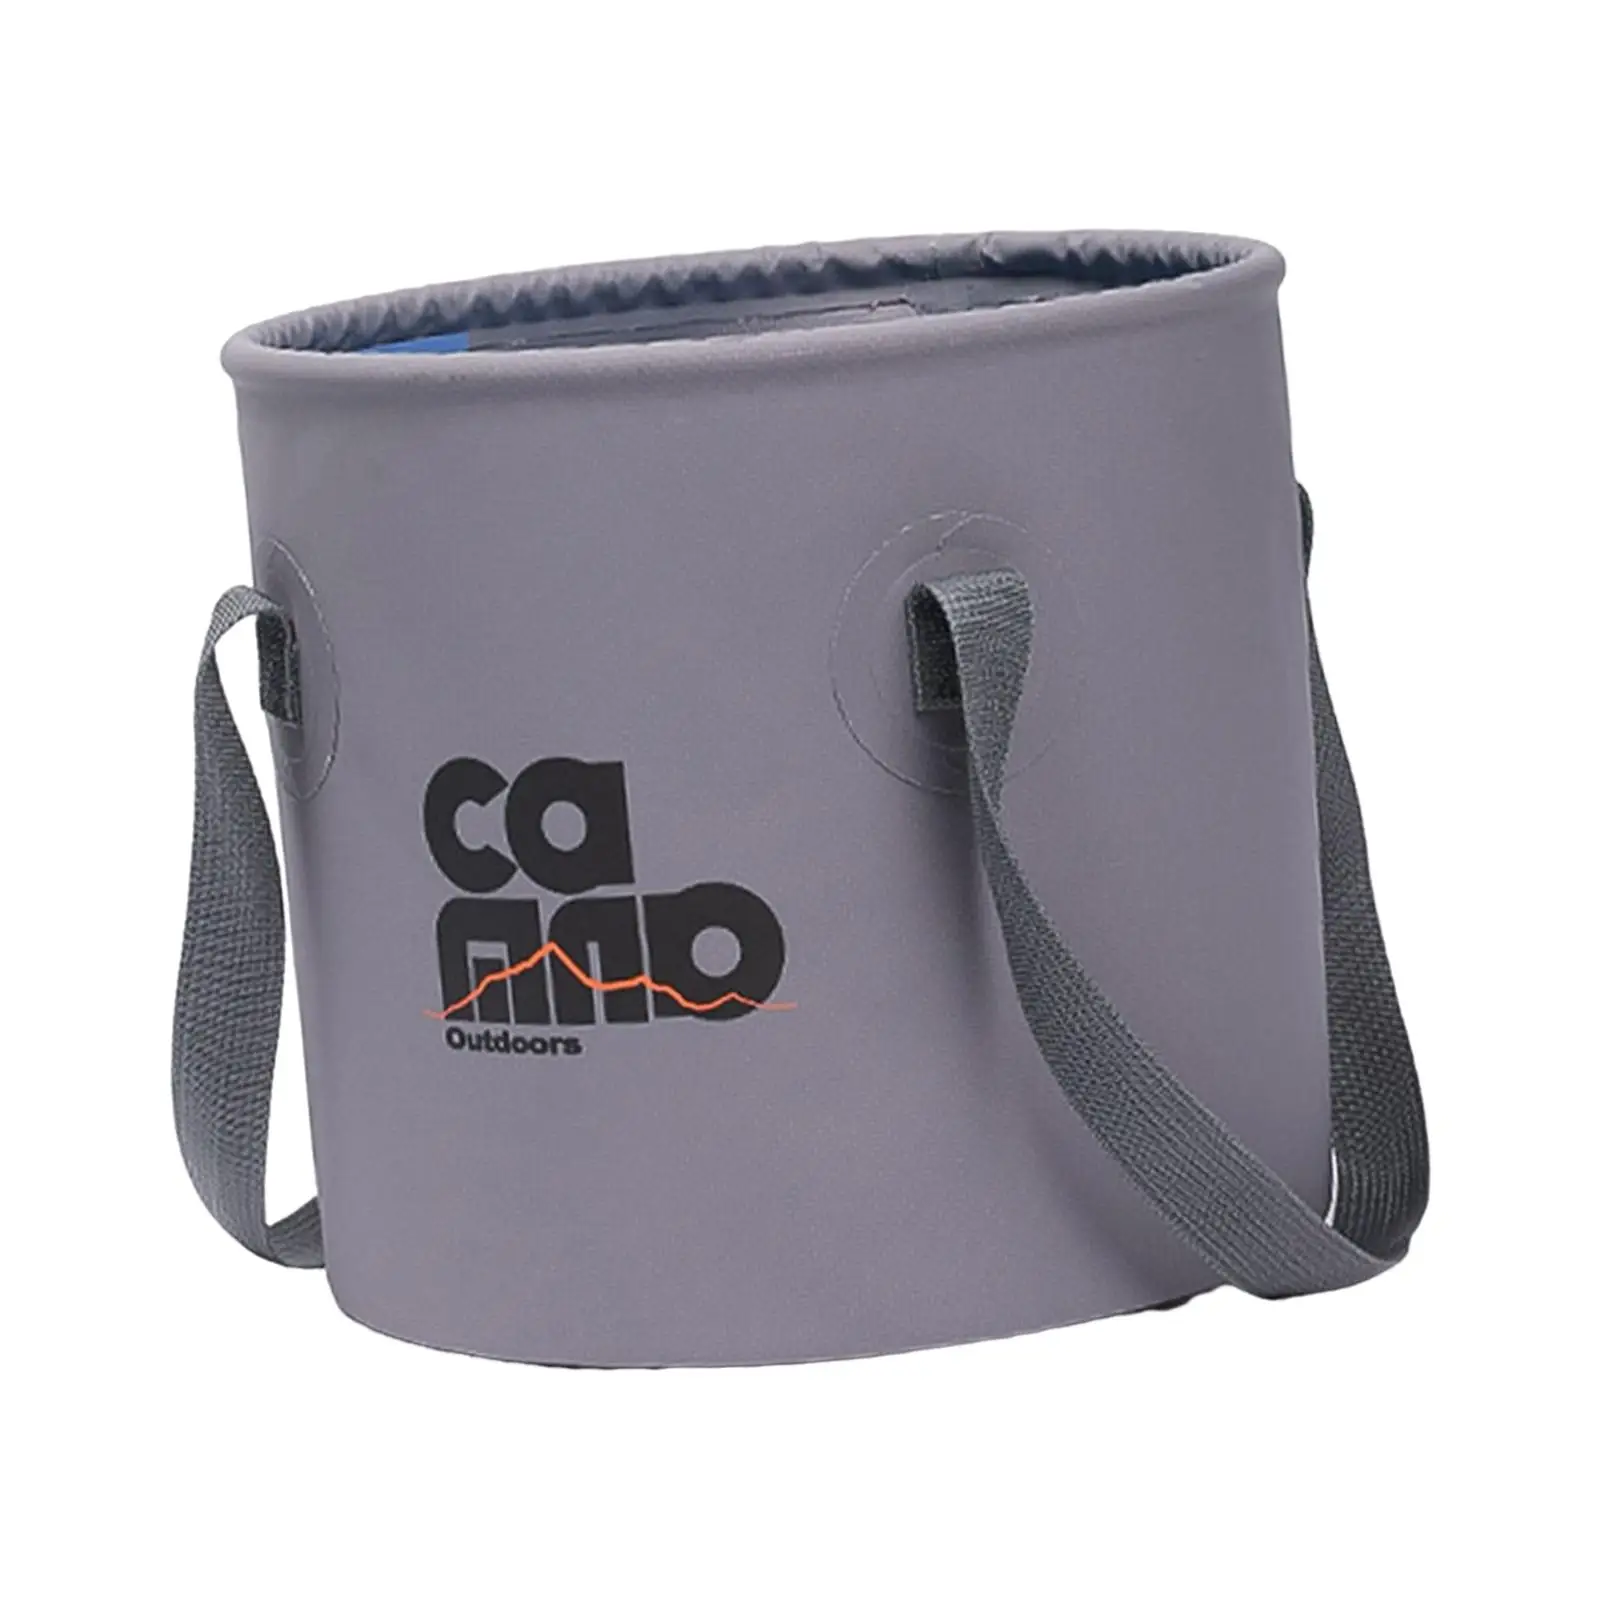 Collapsible Bucket Foldable Multifunctional for Outdoor Activities Picnics